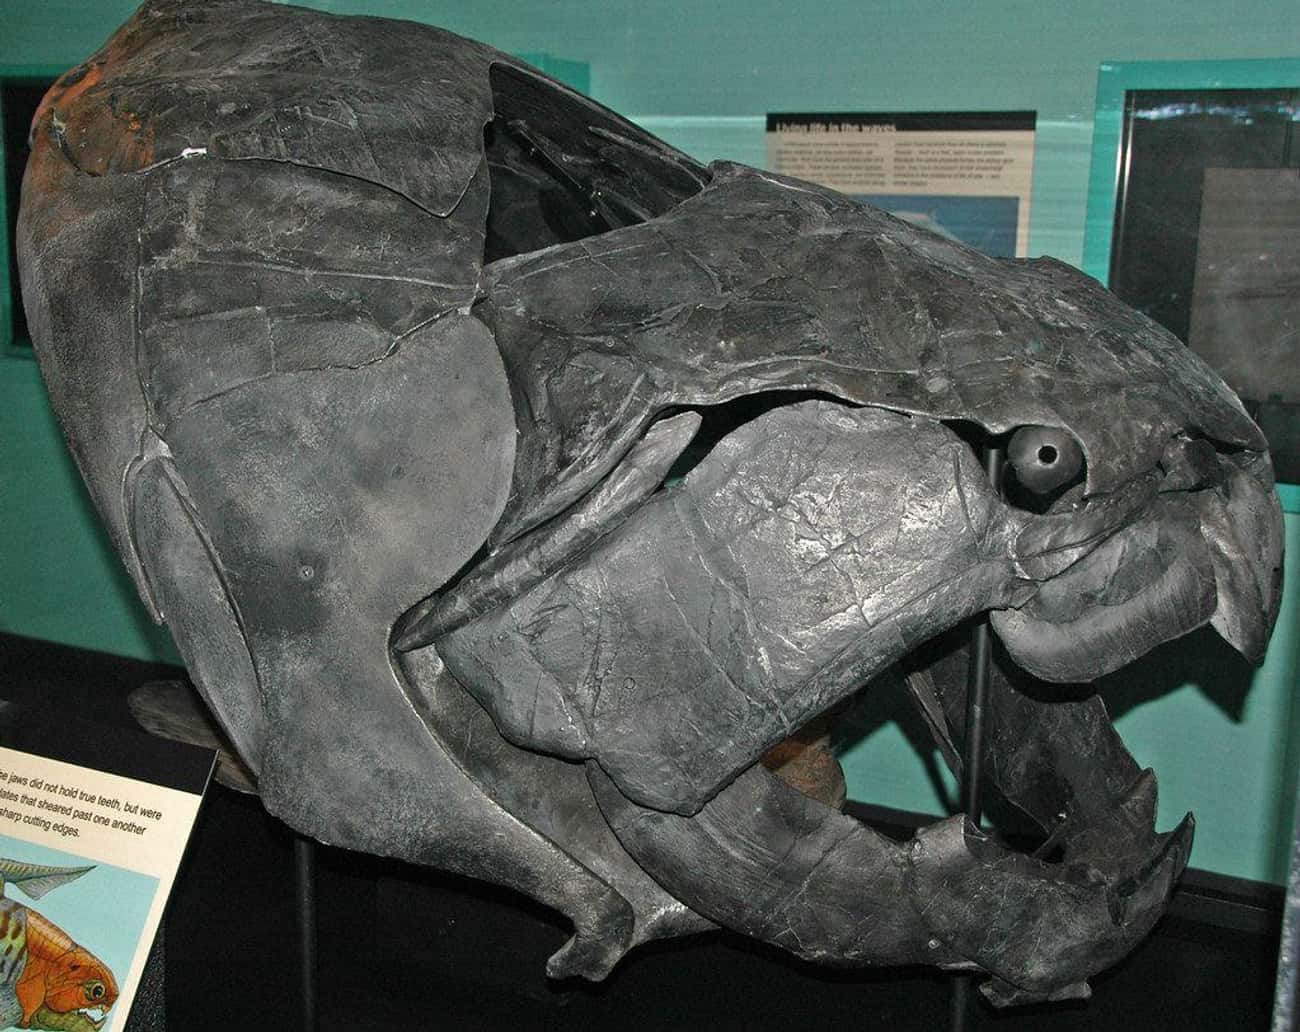 The Dunkleosteus Could Bite You In Half